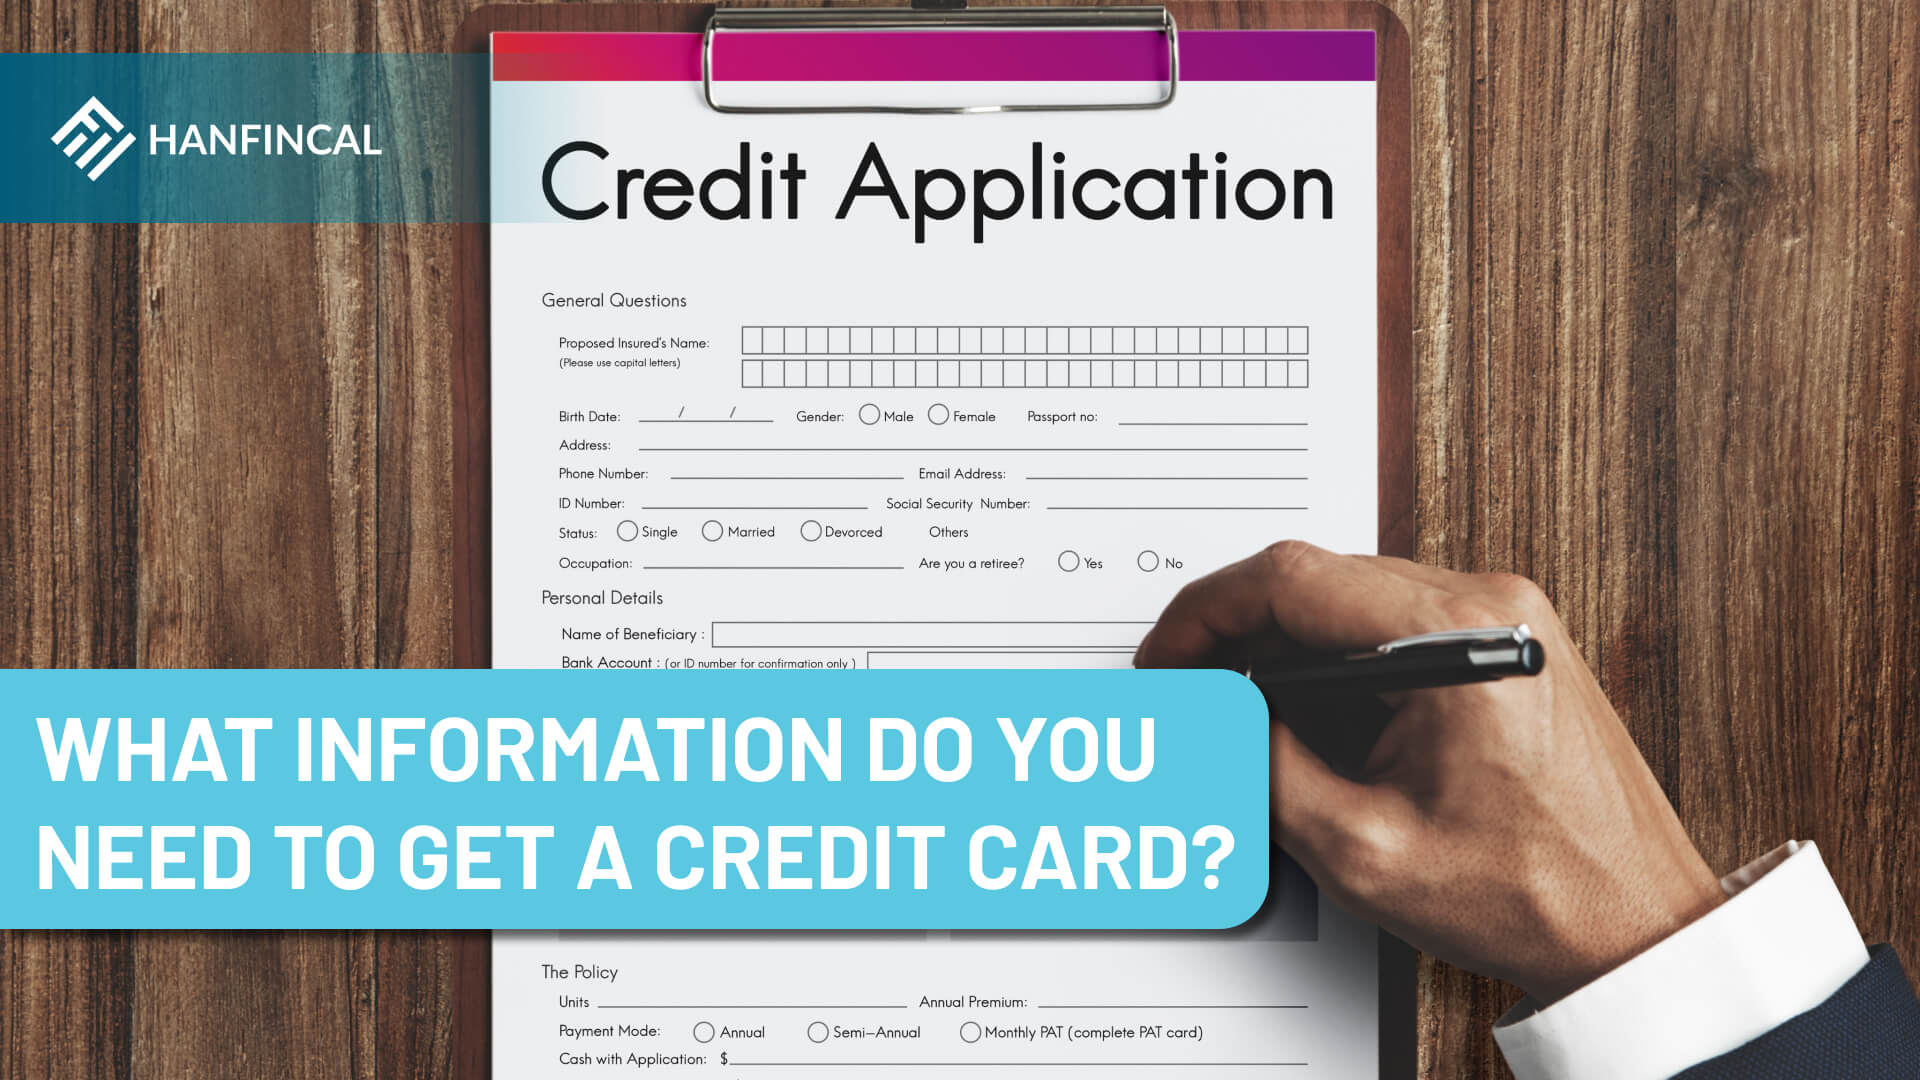 What information do you need to get a credit card?